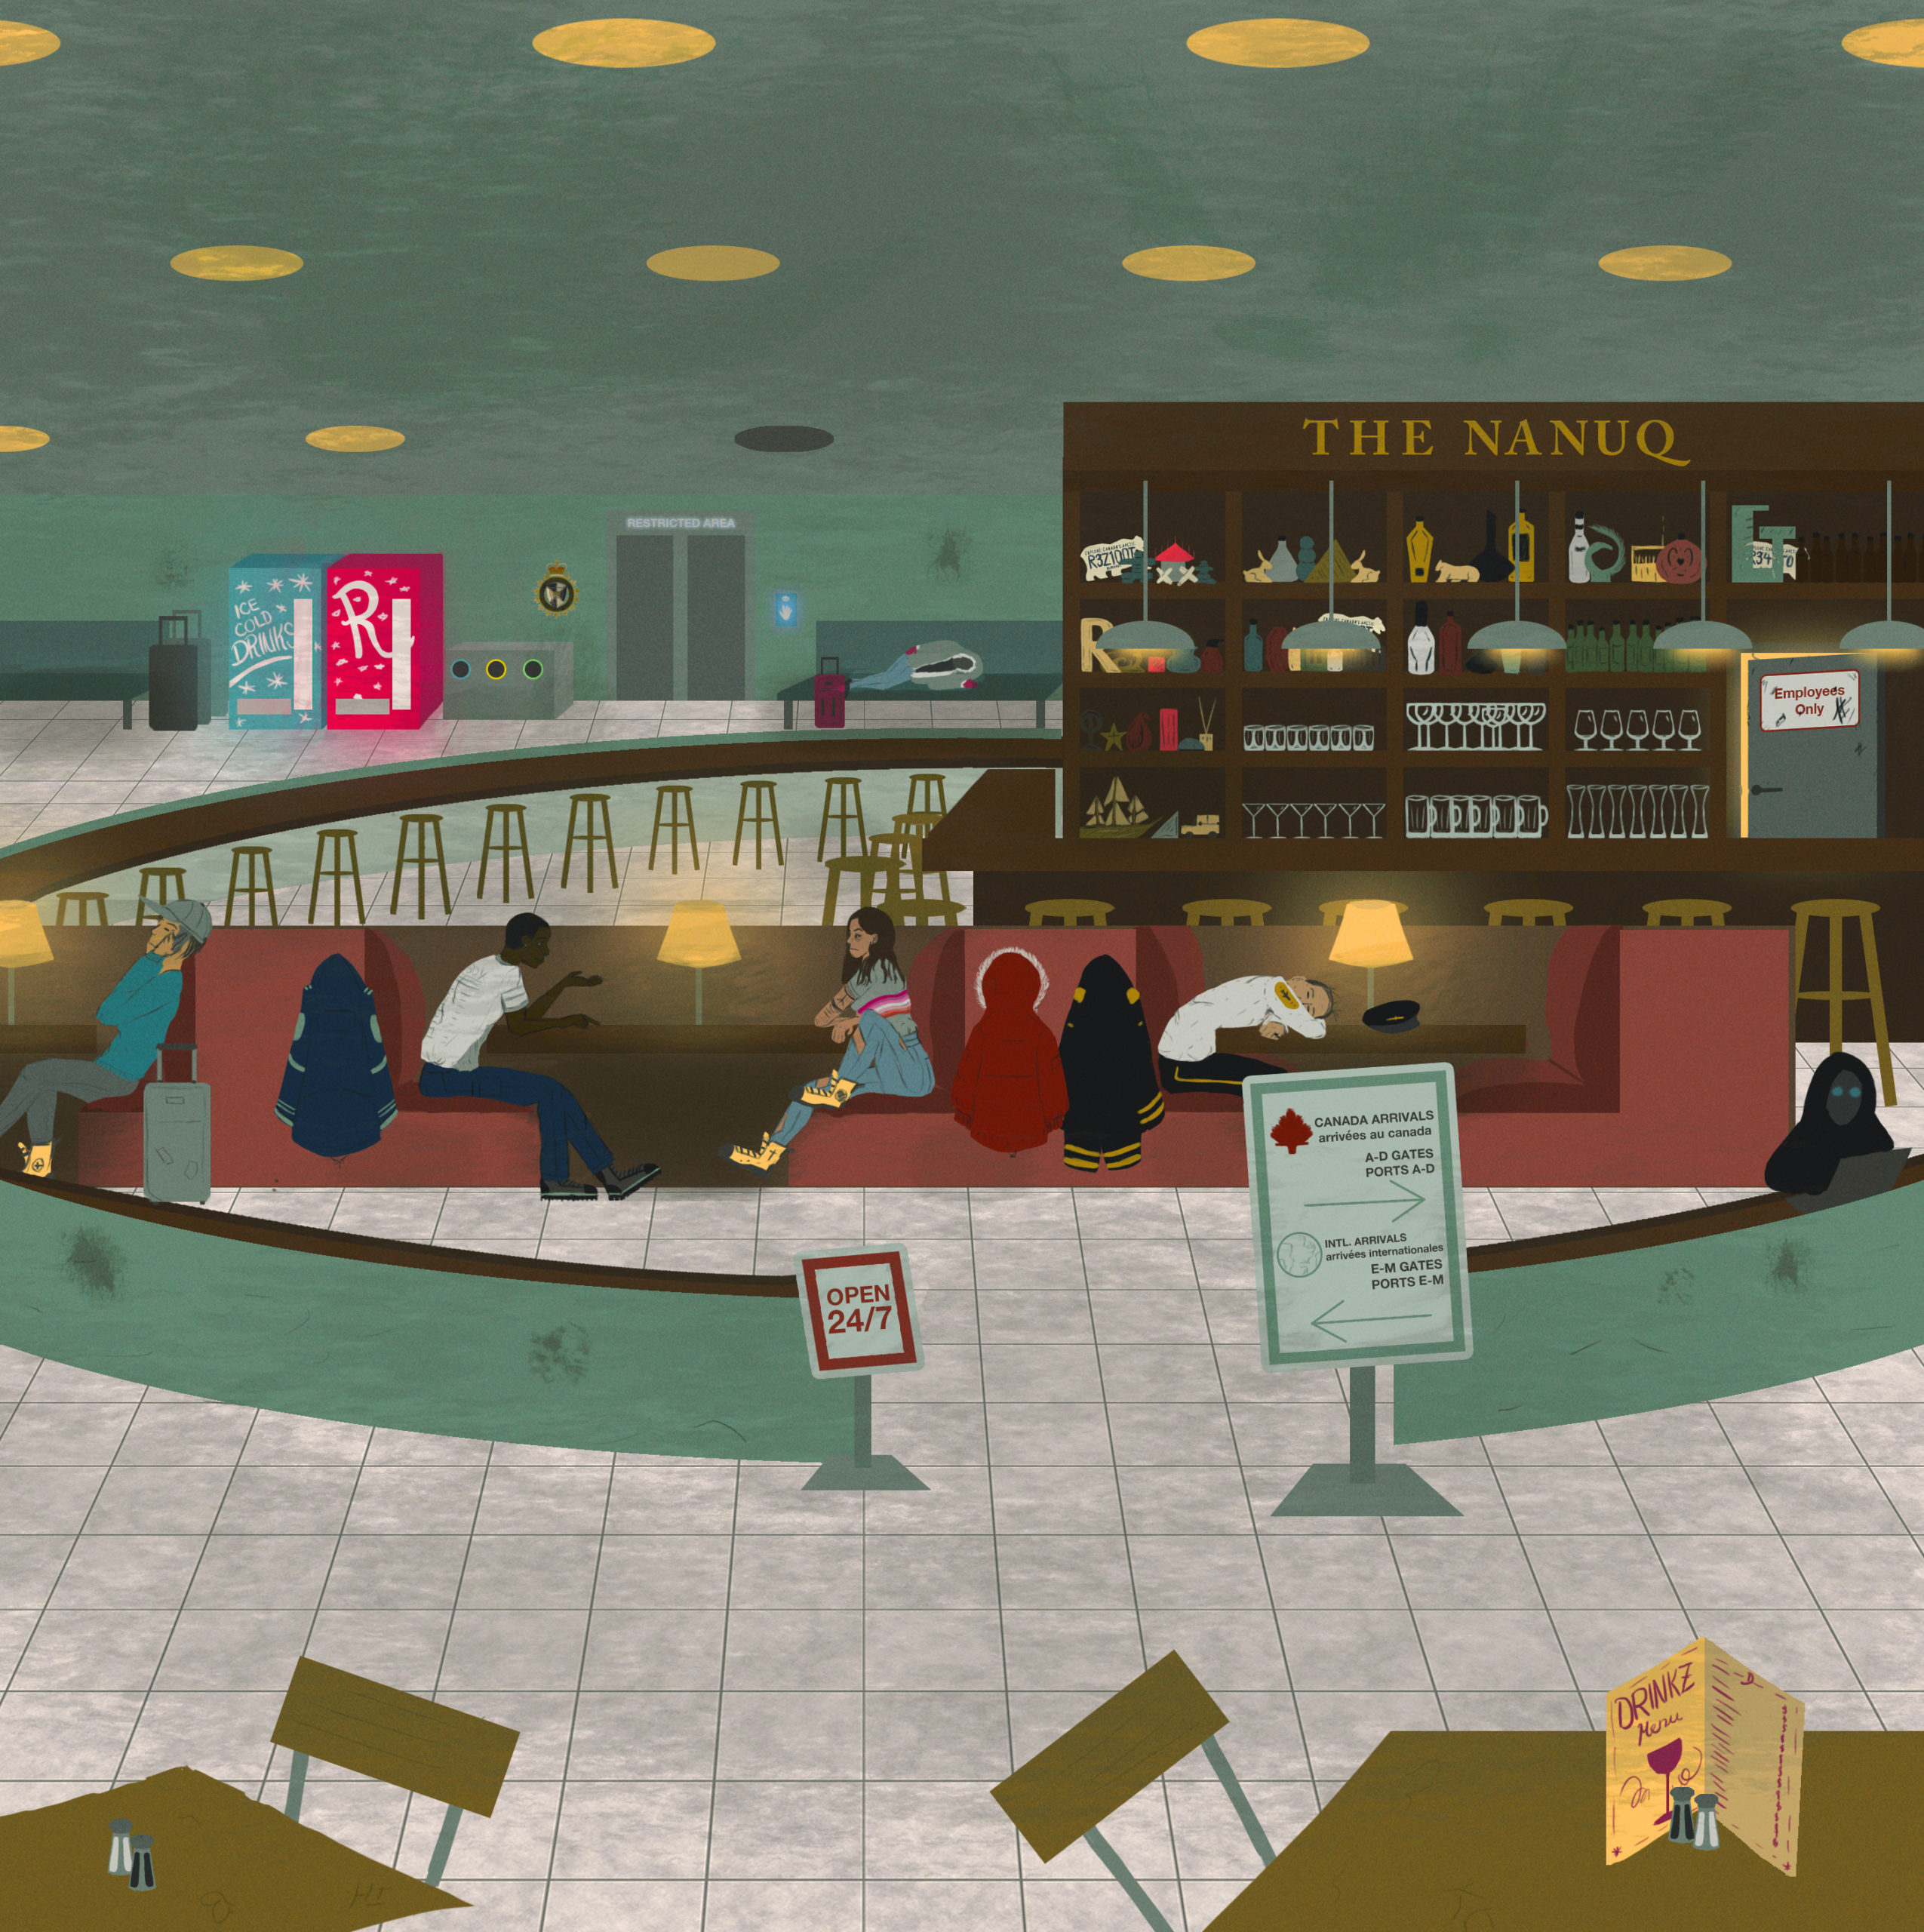 Detailed Illustration of the interior of the Port of Resolute, showcasing a small bar called 